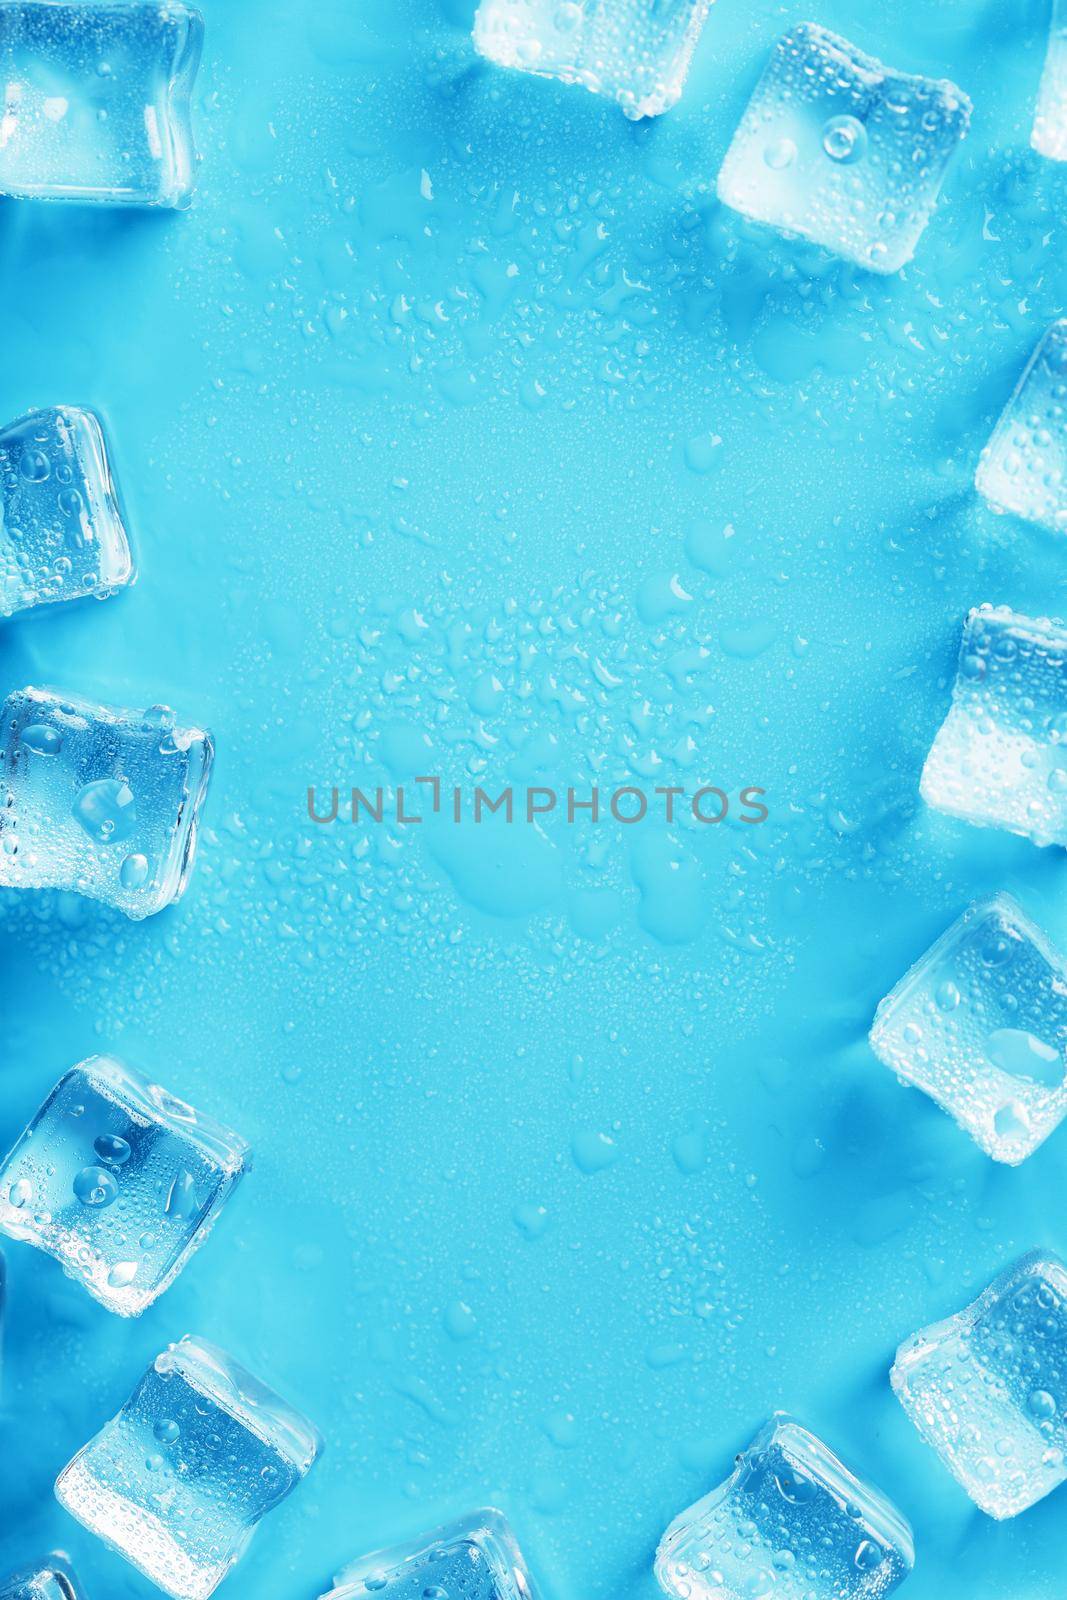 Ice cubes with water drops scattered on a blue background, top view